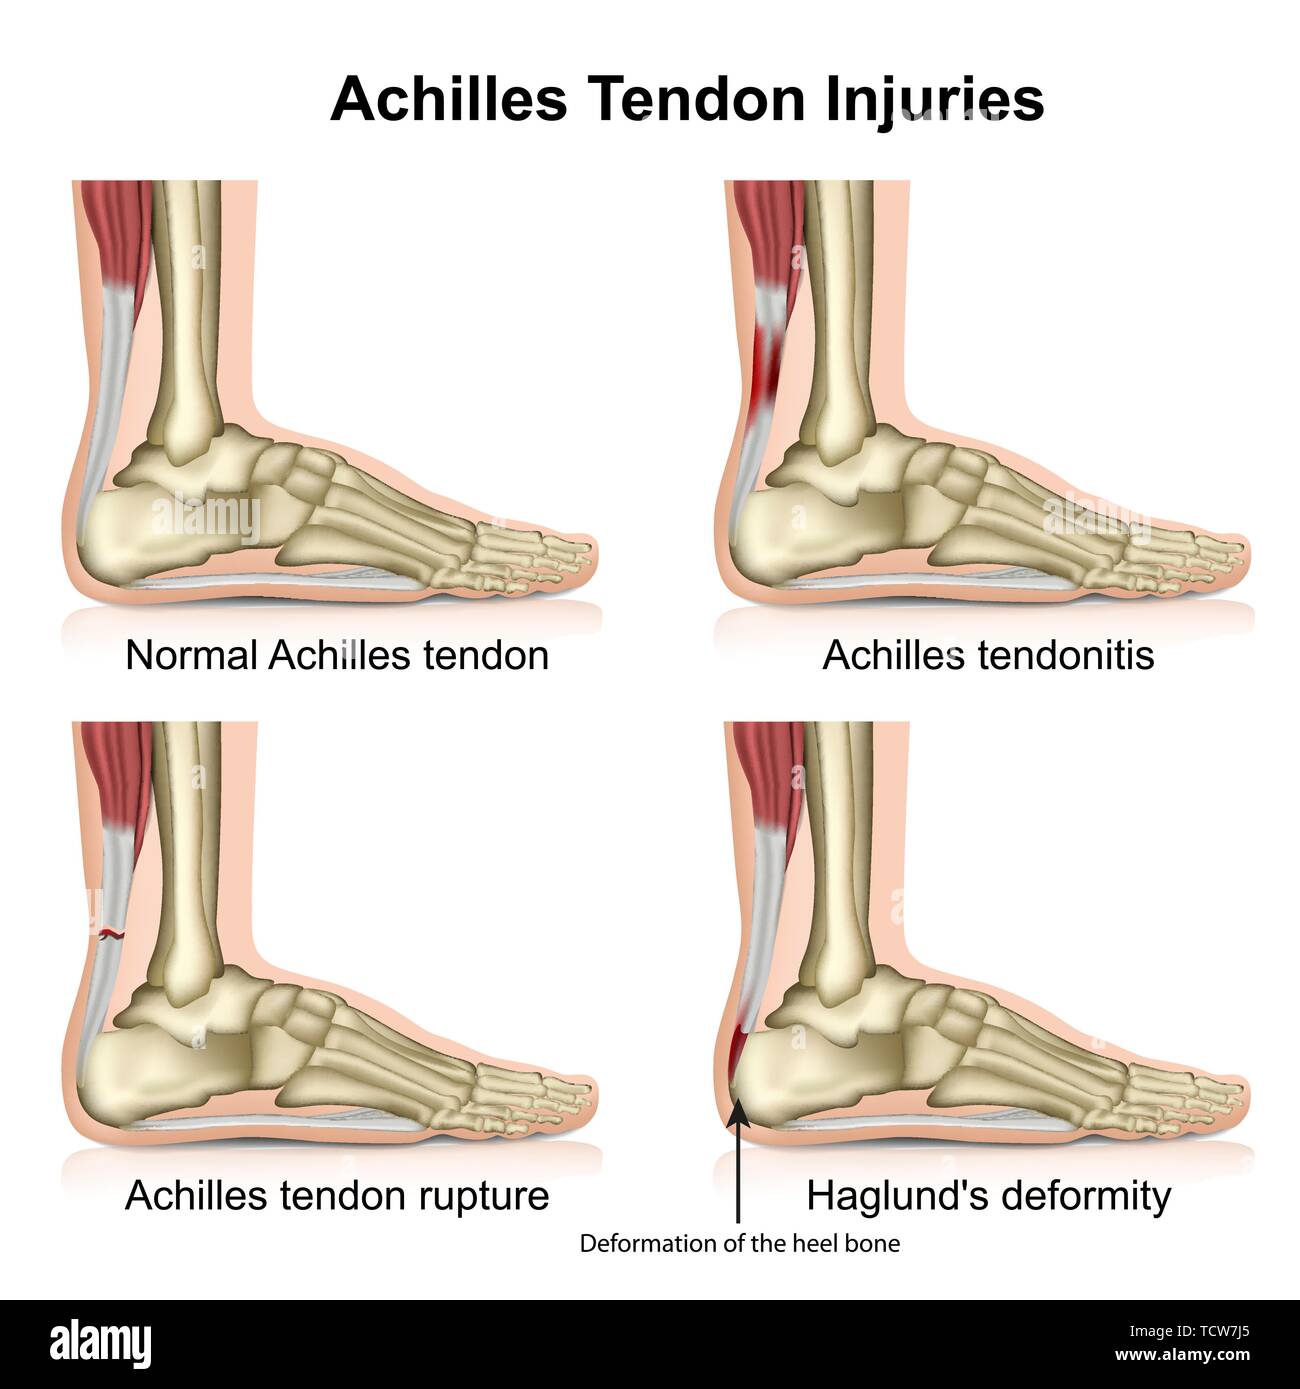 Inflammation Of Achilles Tendon Clearance Discount, Save 60% | jlcatj ...